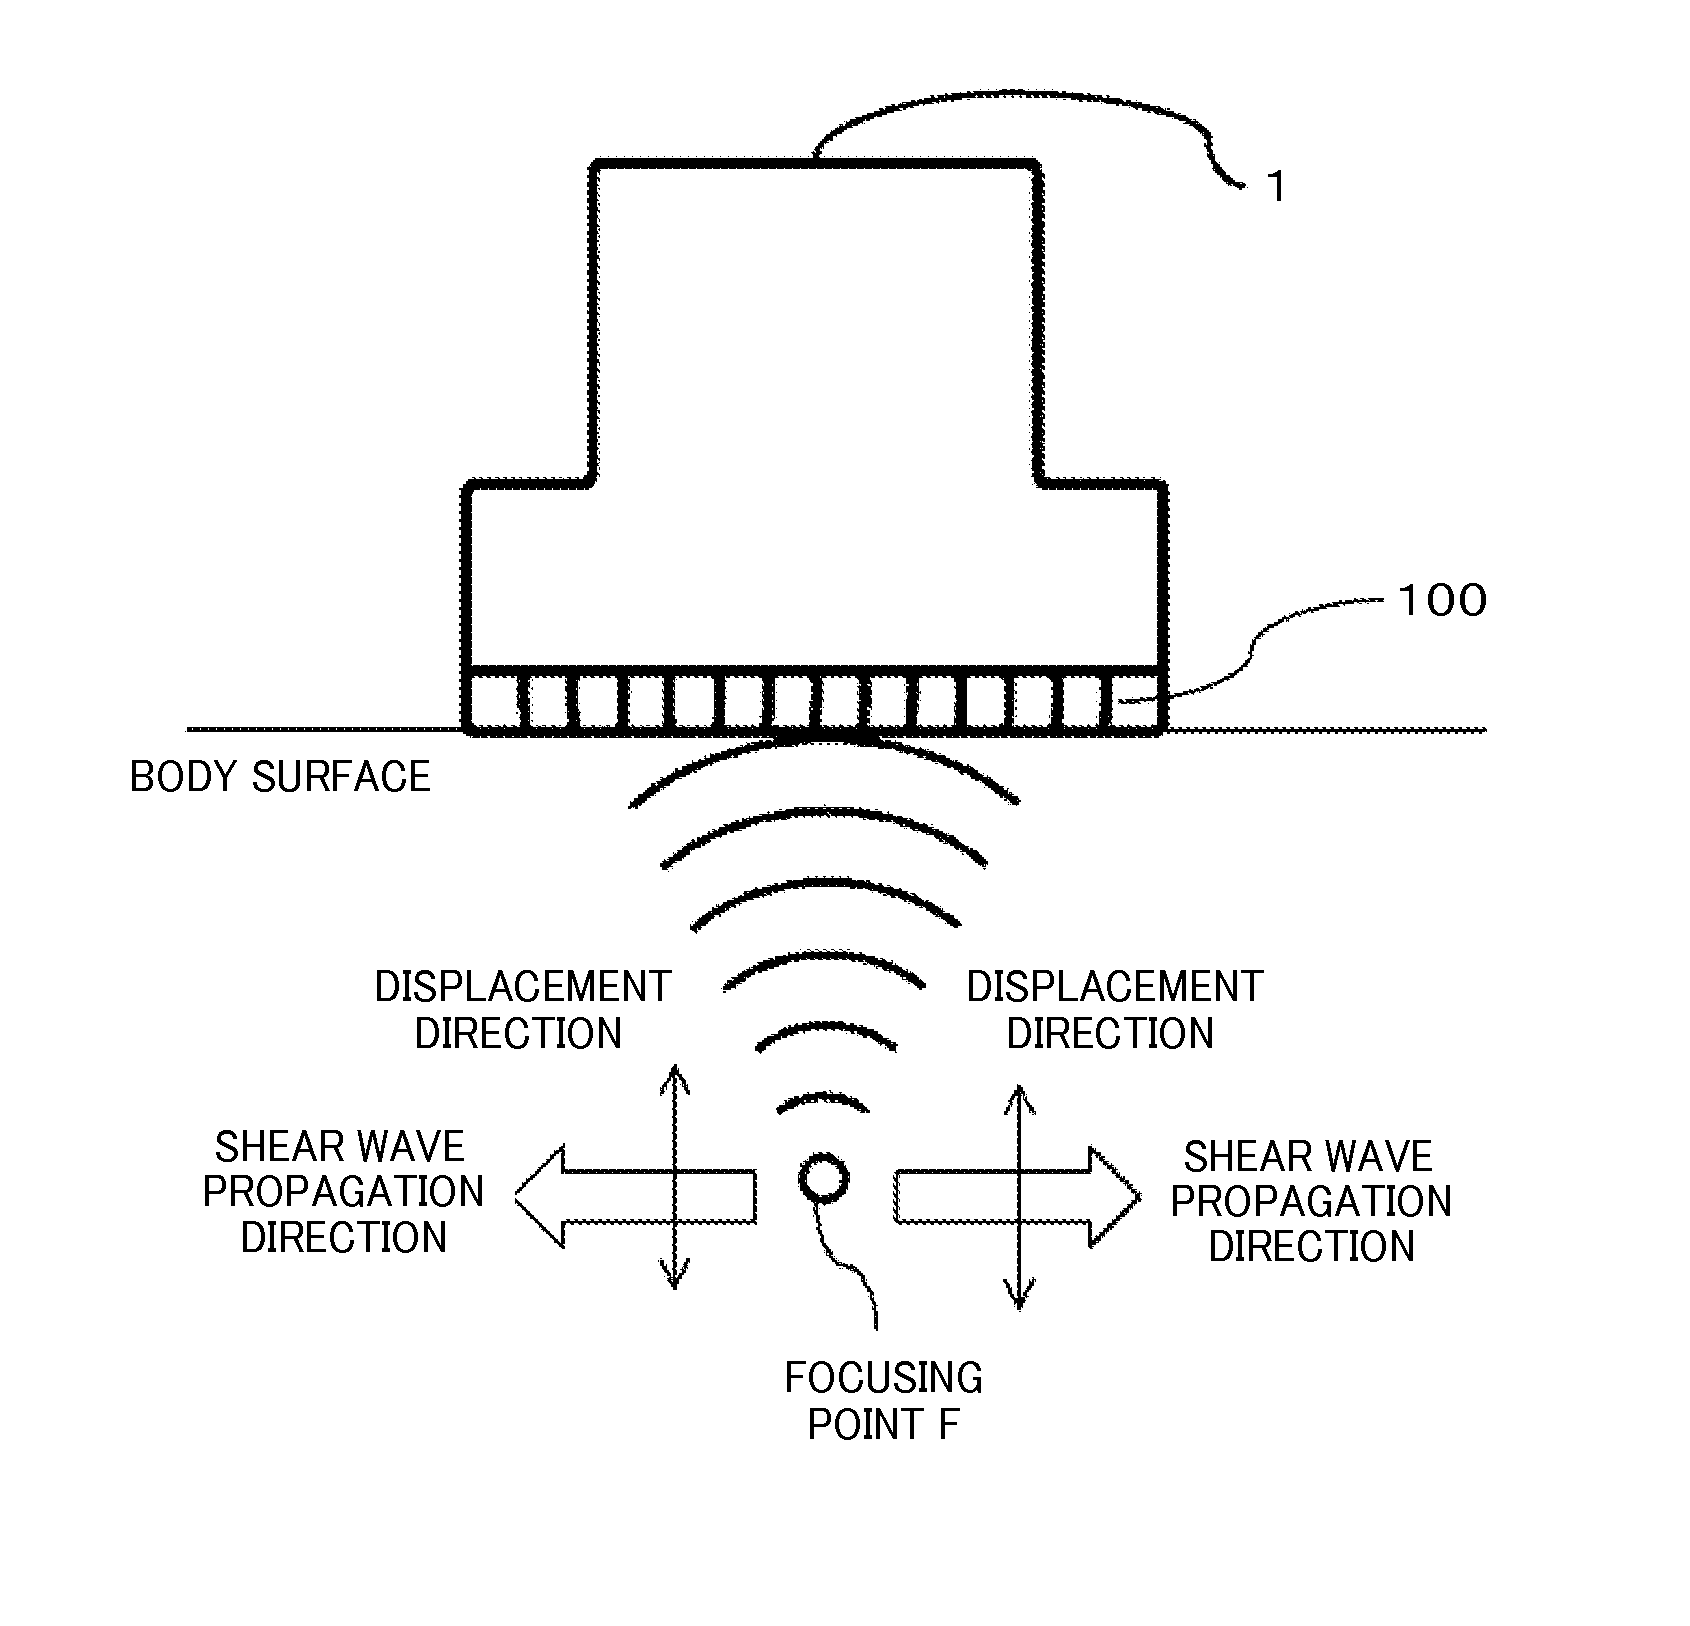 Apparatus and method for ultrasonic diagnosis